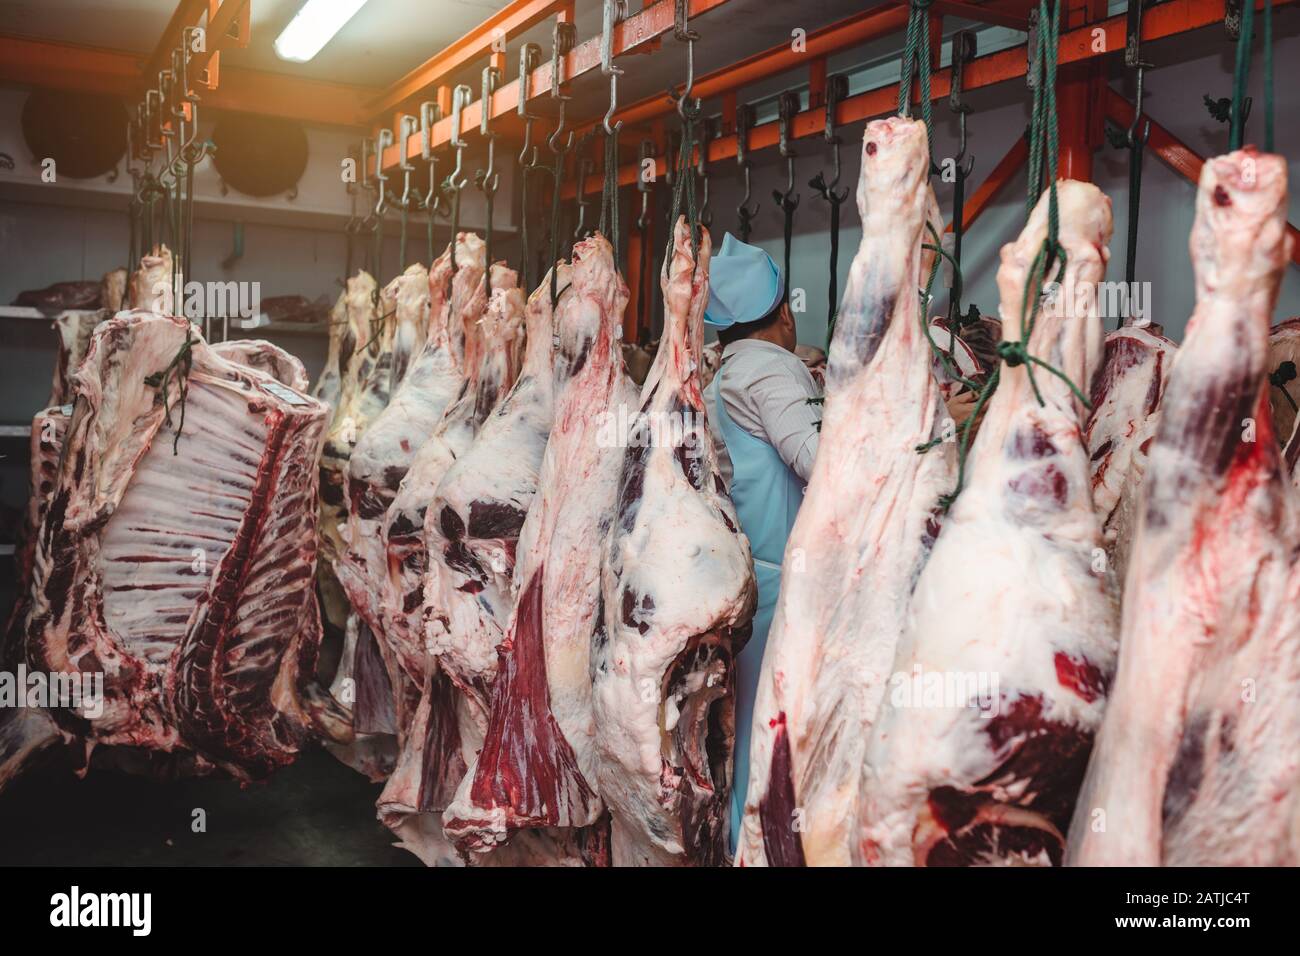 Meat barns or cold rooms for keeping good quality beef from a butcher shop. Stock Photo